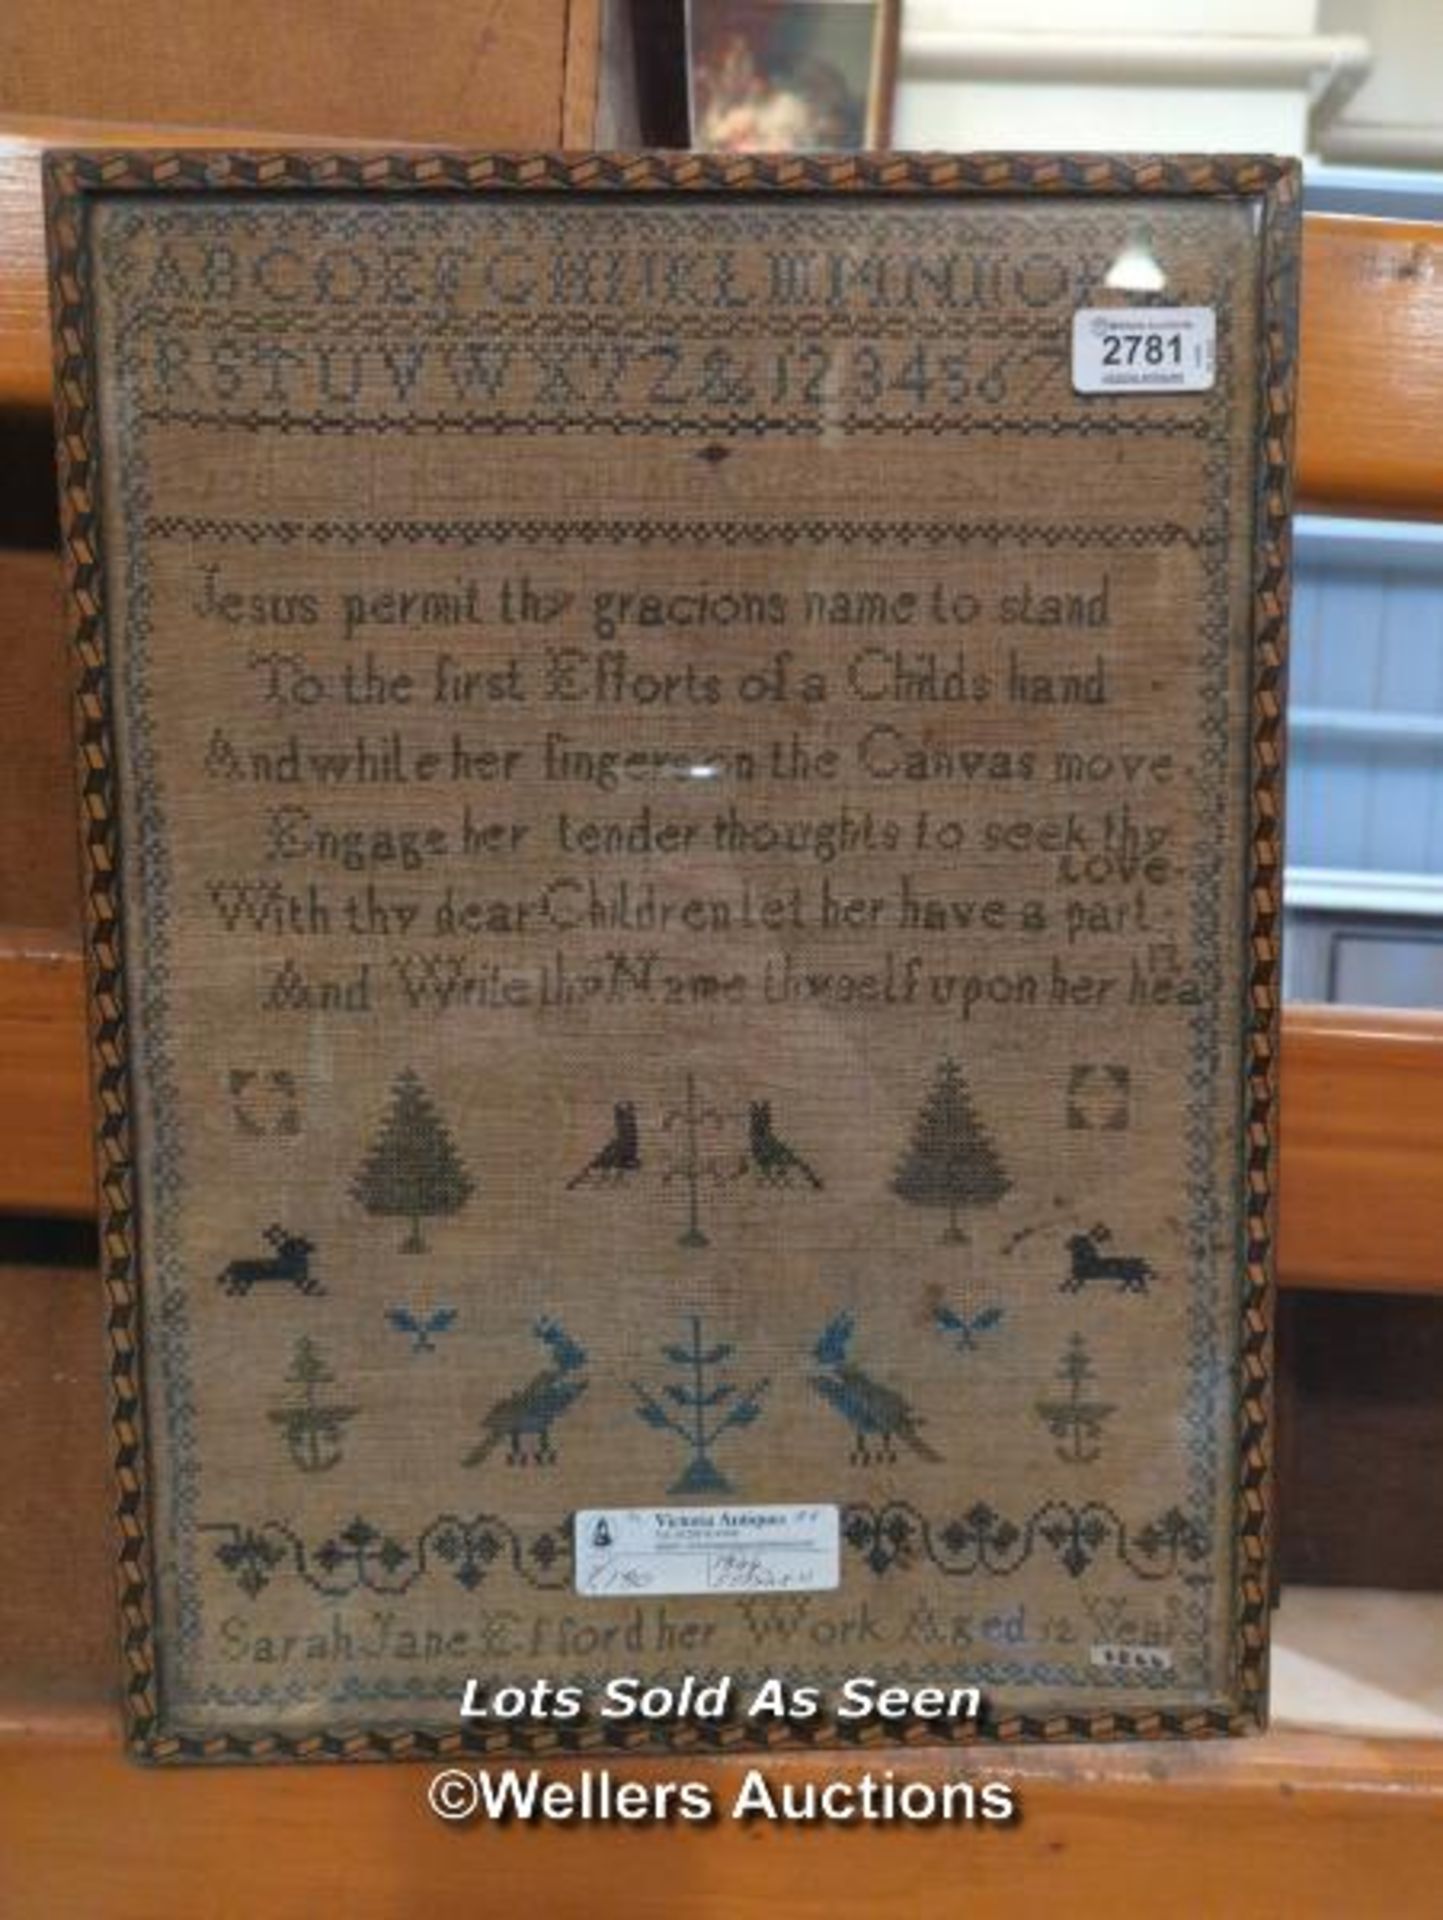 *FRAMED SAMPLER C1844 BY SARAH JANE EFFORDHER AGED 12 YEARS, 31 X 42.5CM / LOCATED AT VICTORIA